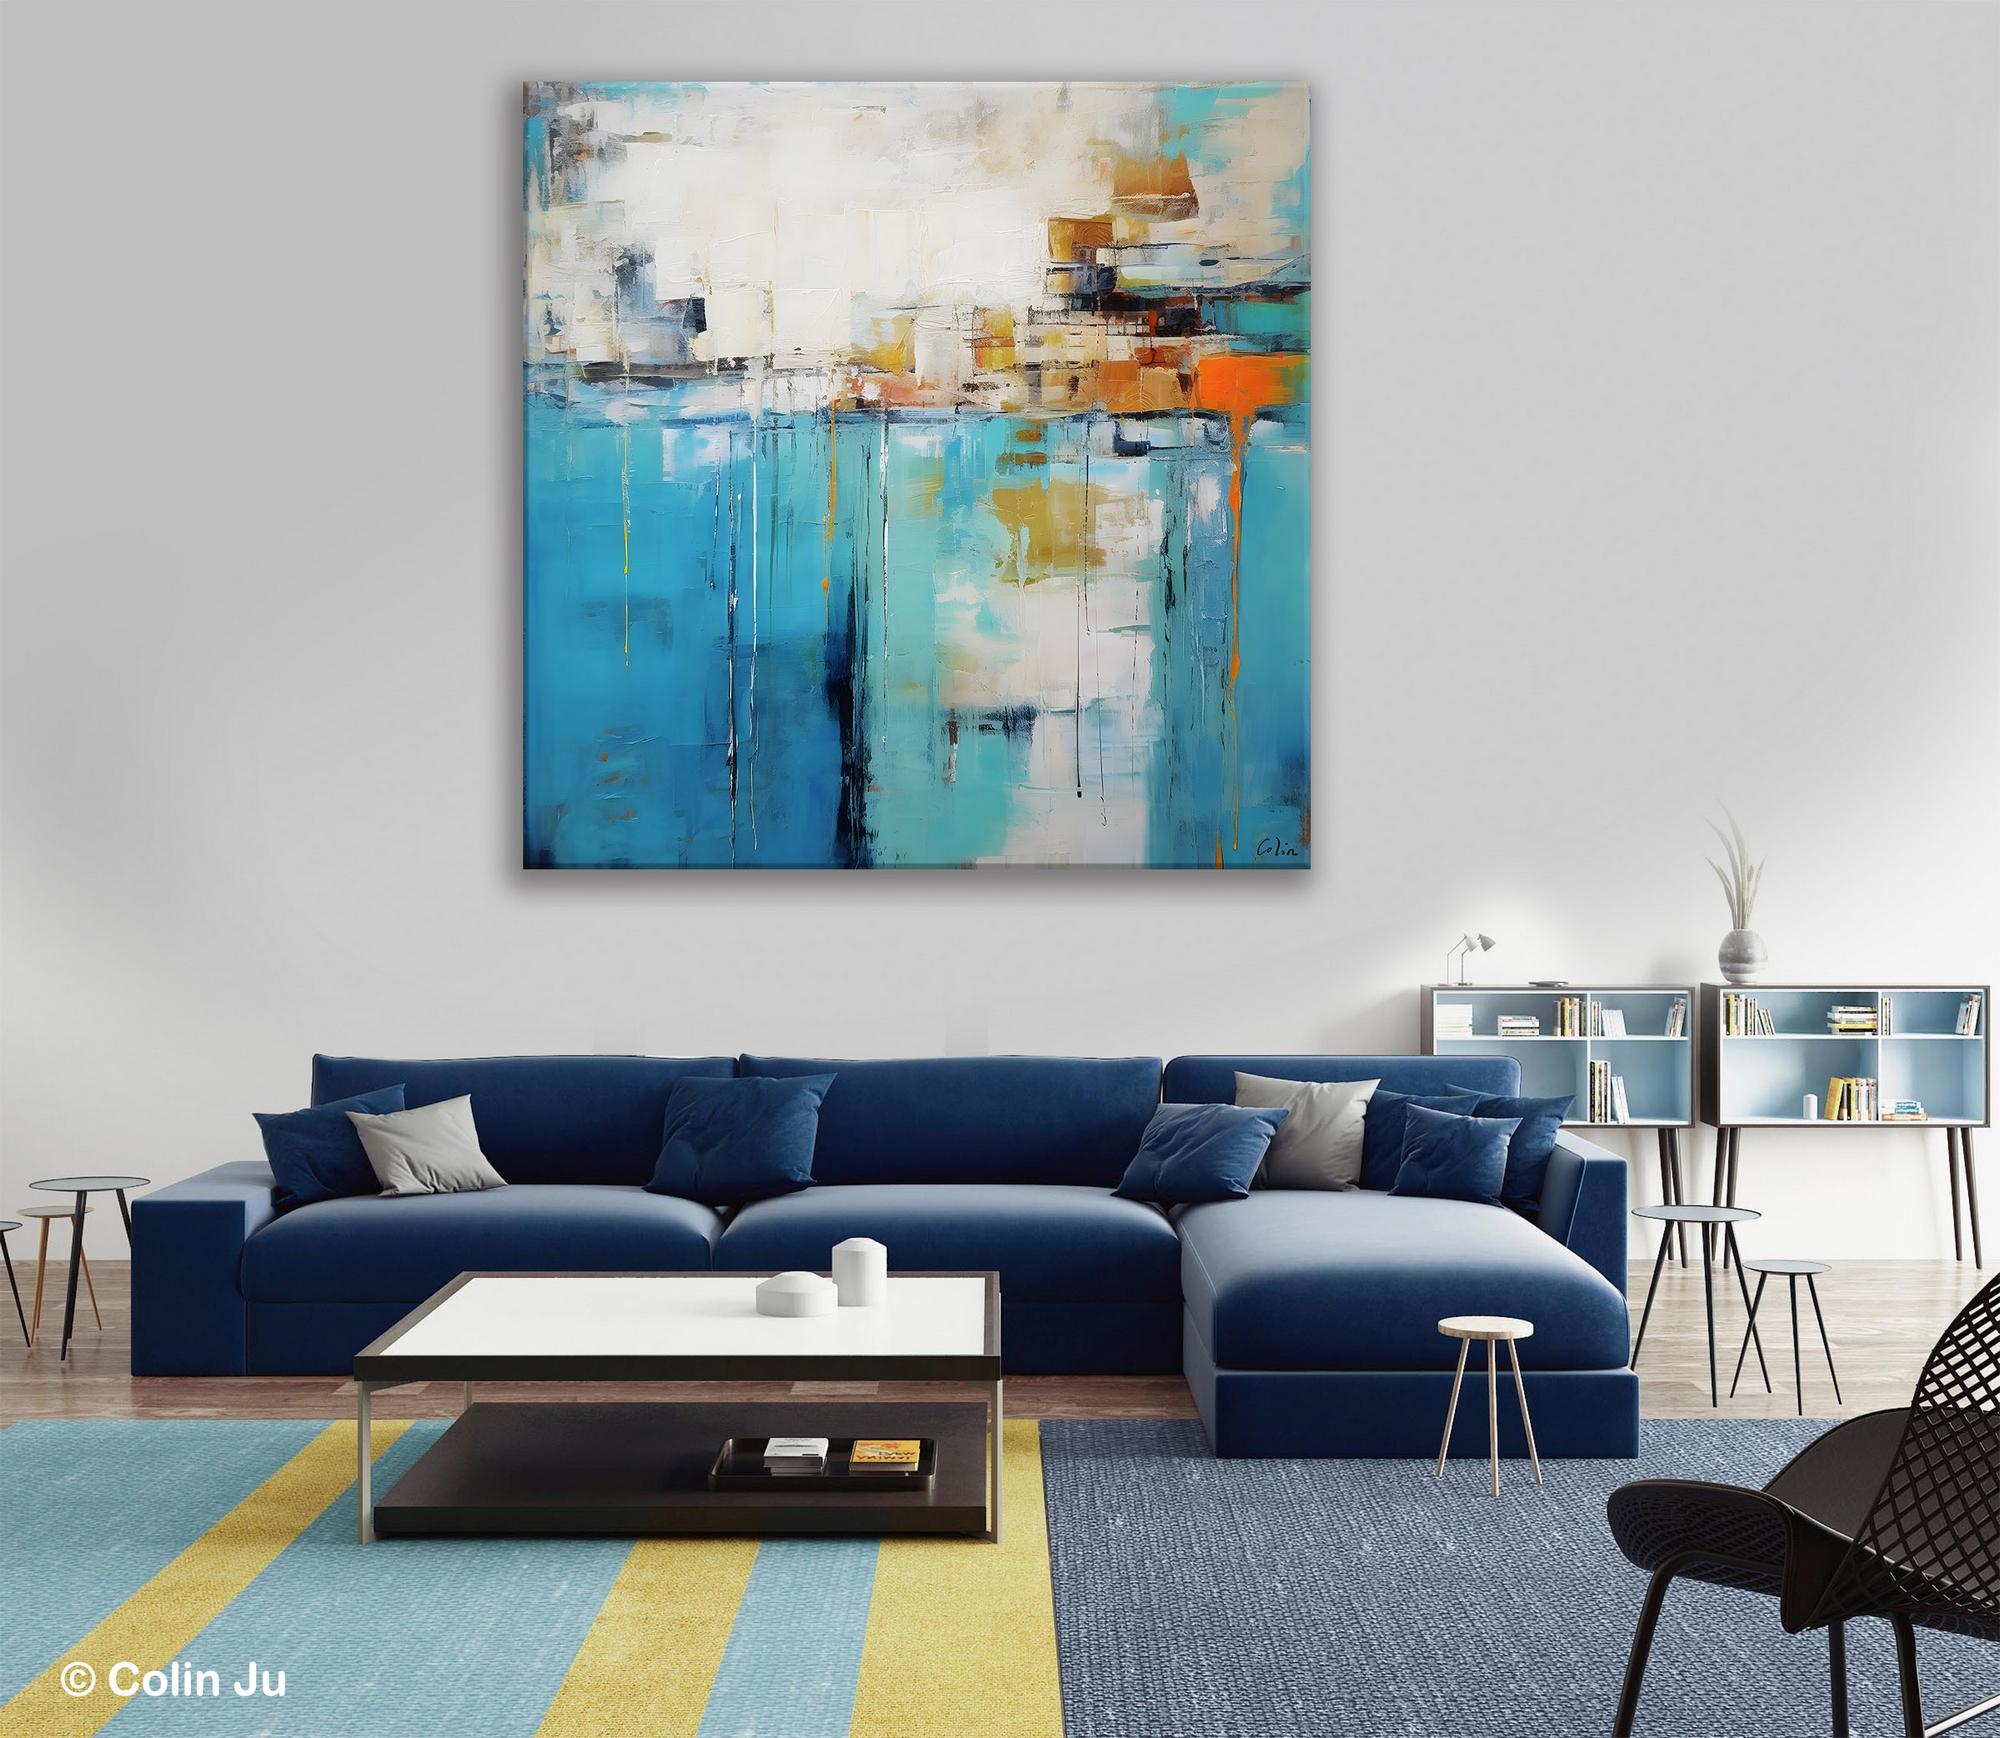 Abstract Painting on Canvas, Original Abstract Wall Art for Sale, Contemporary Acrylic Paintings, Extra Large Canvas Painting for Bedroom-LargePaintingArt.com